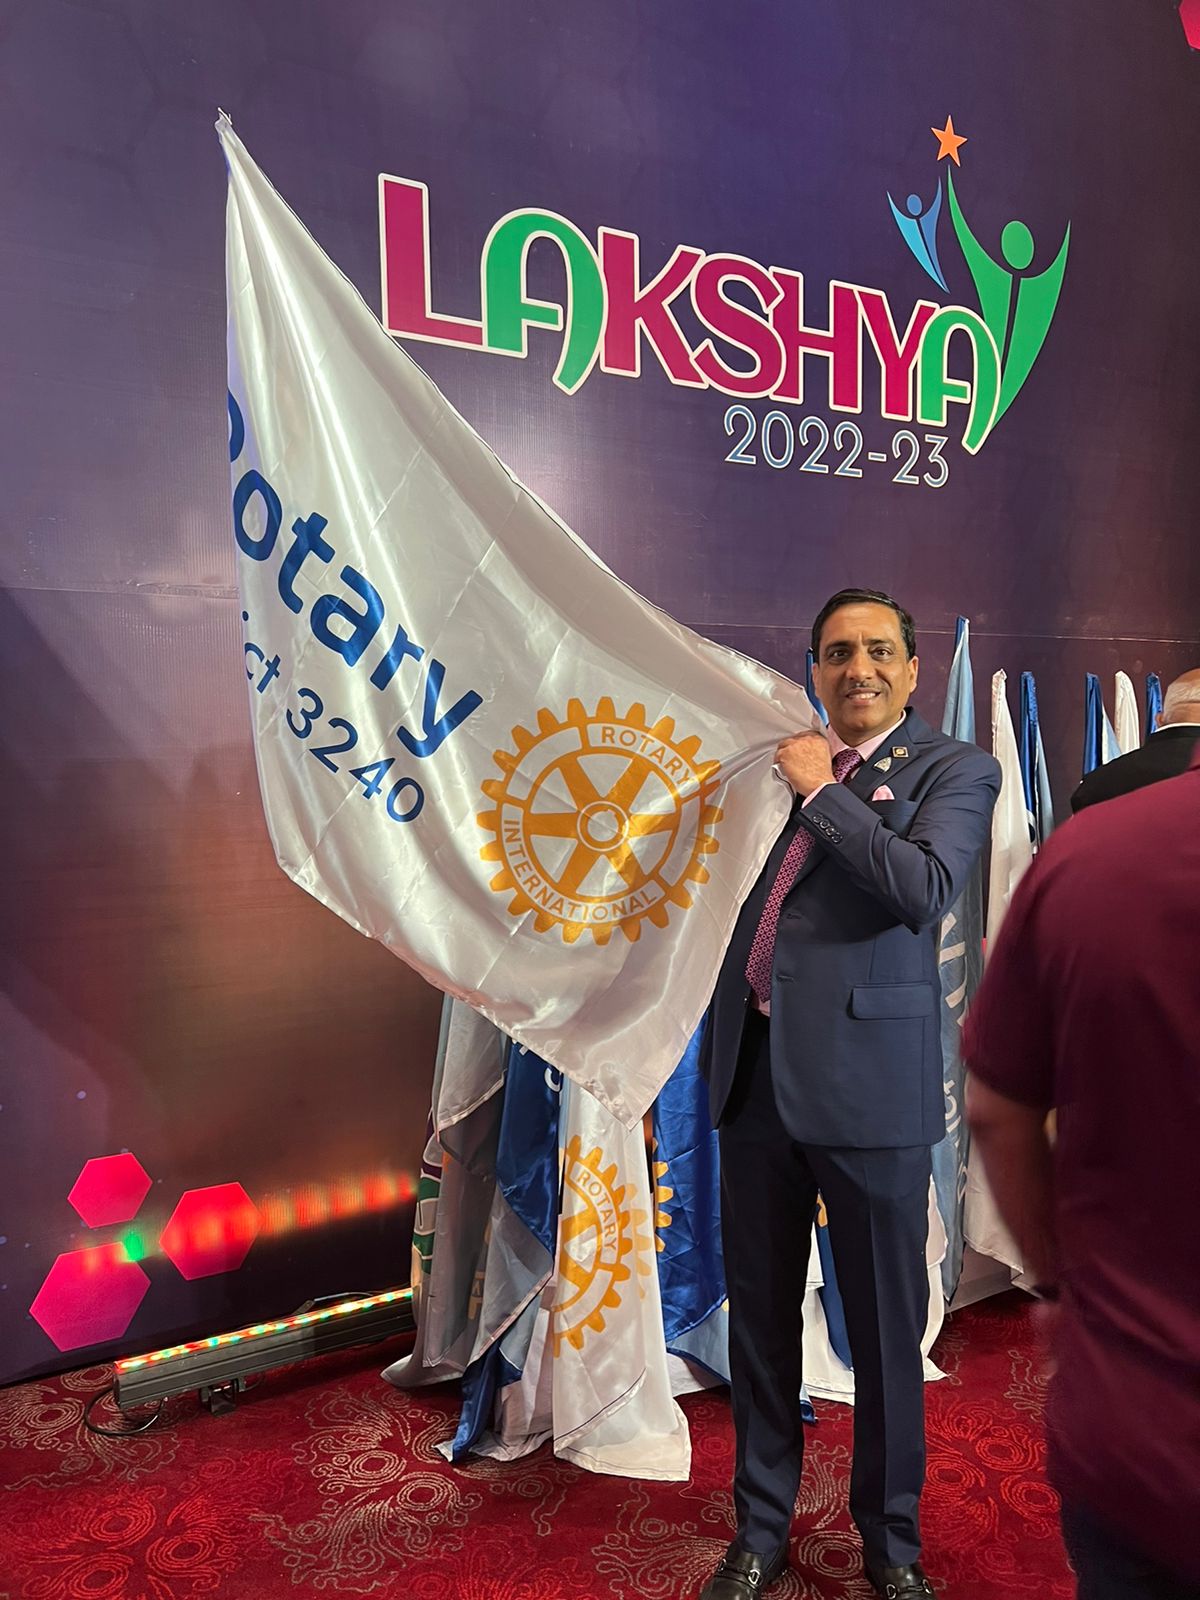 Lakshya Conference Attended by Rtn Chandu Agarwal